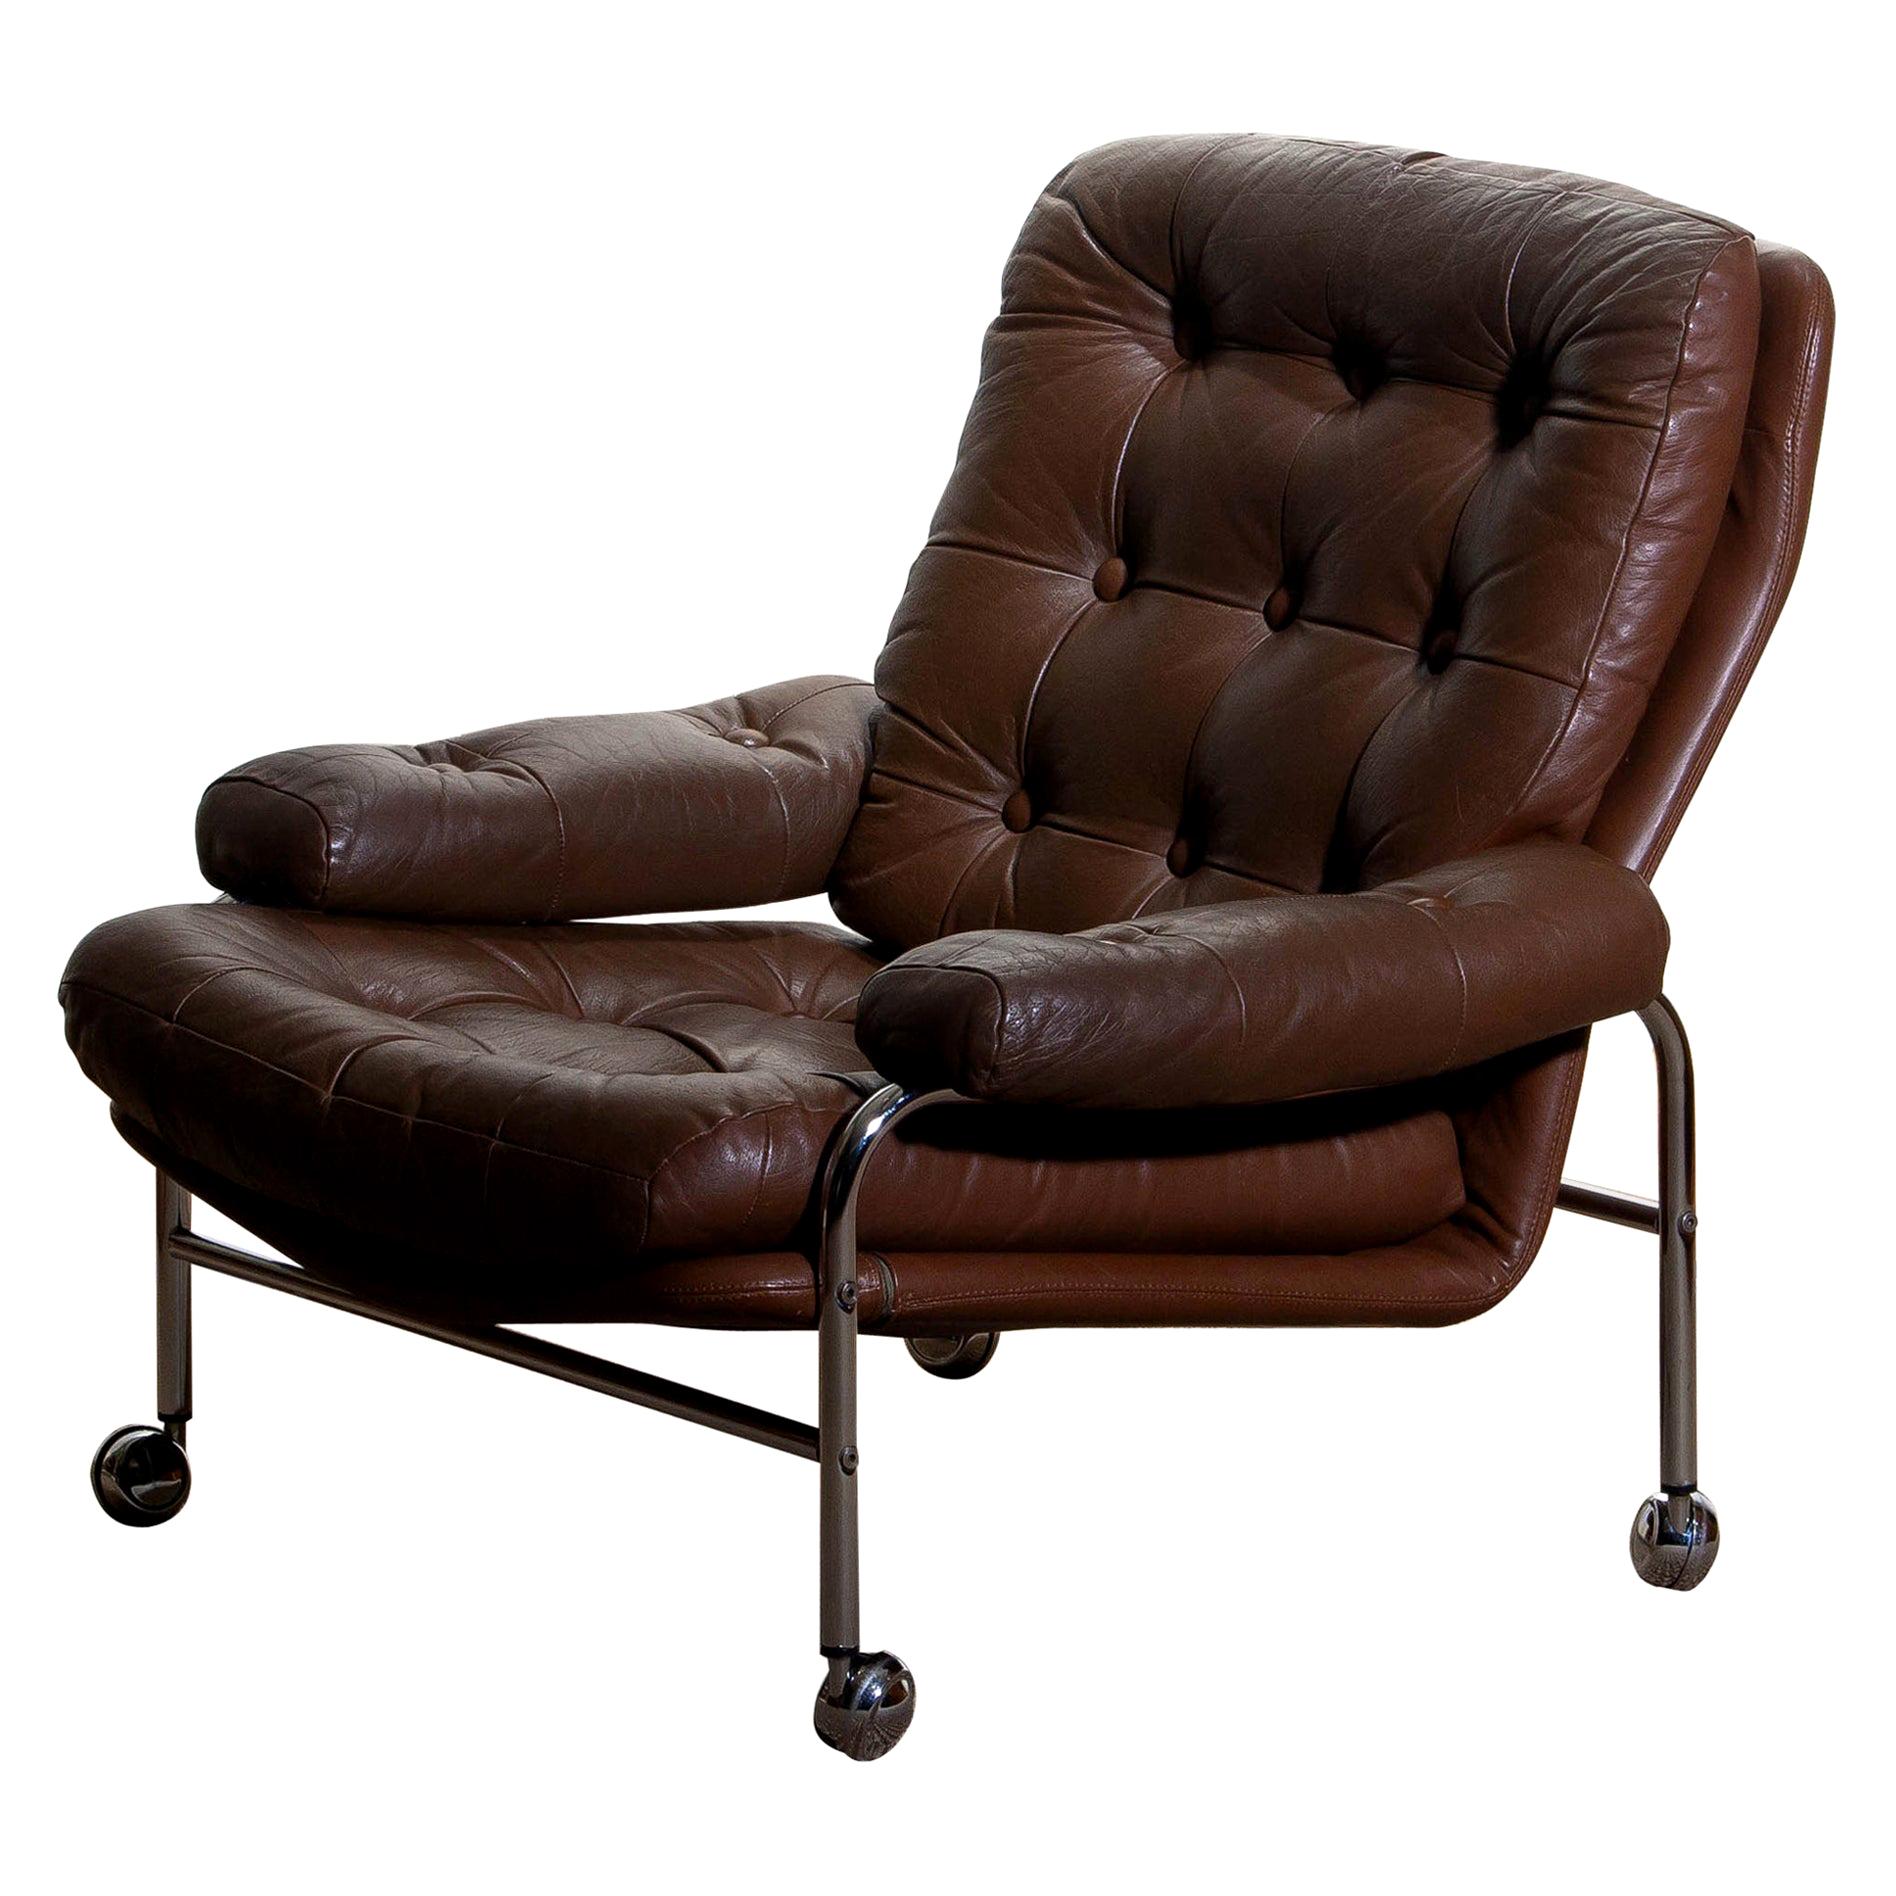 Extremely comfortable easy or lounge chair made by Scapa Rydaholm, Sweden.
This, typical Scandinavian chair is upholstered with brown leather based on a chromed metal frame.
All in perfect condition.

   